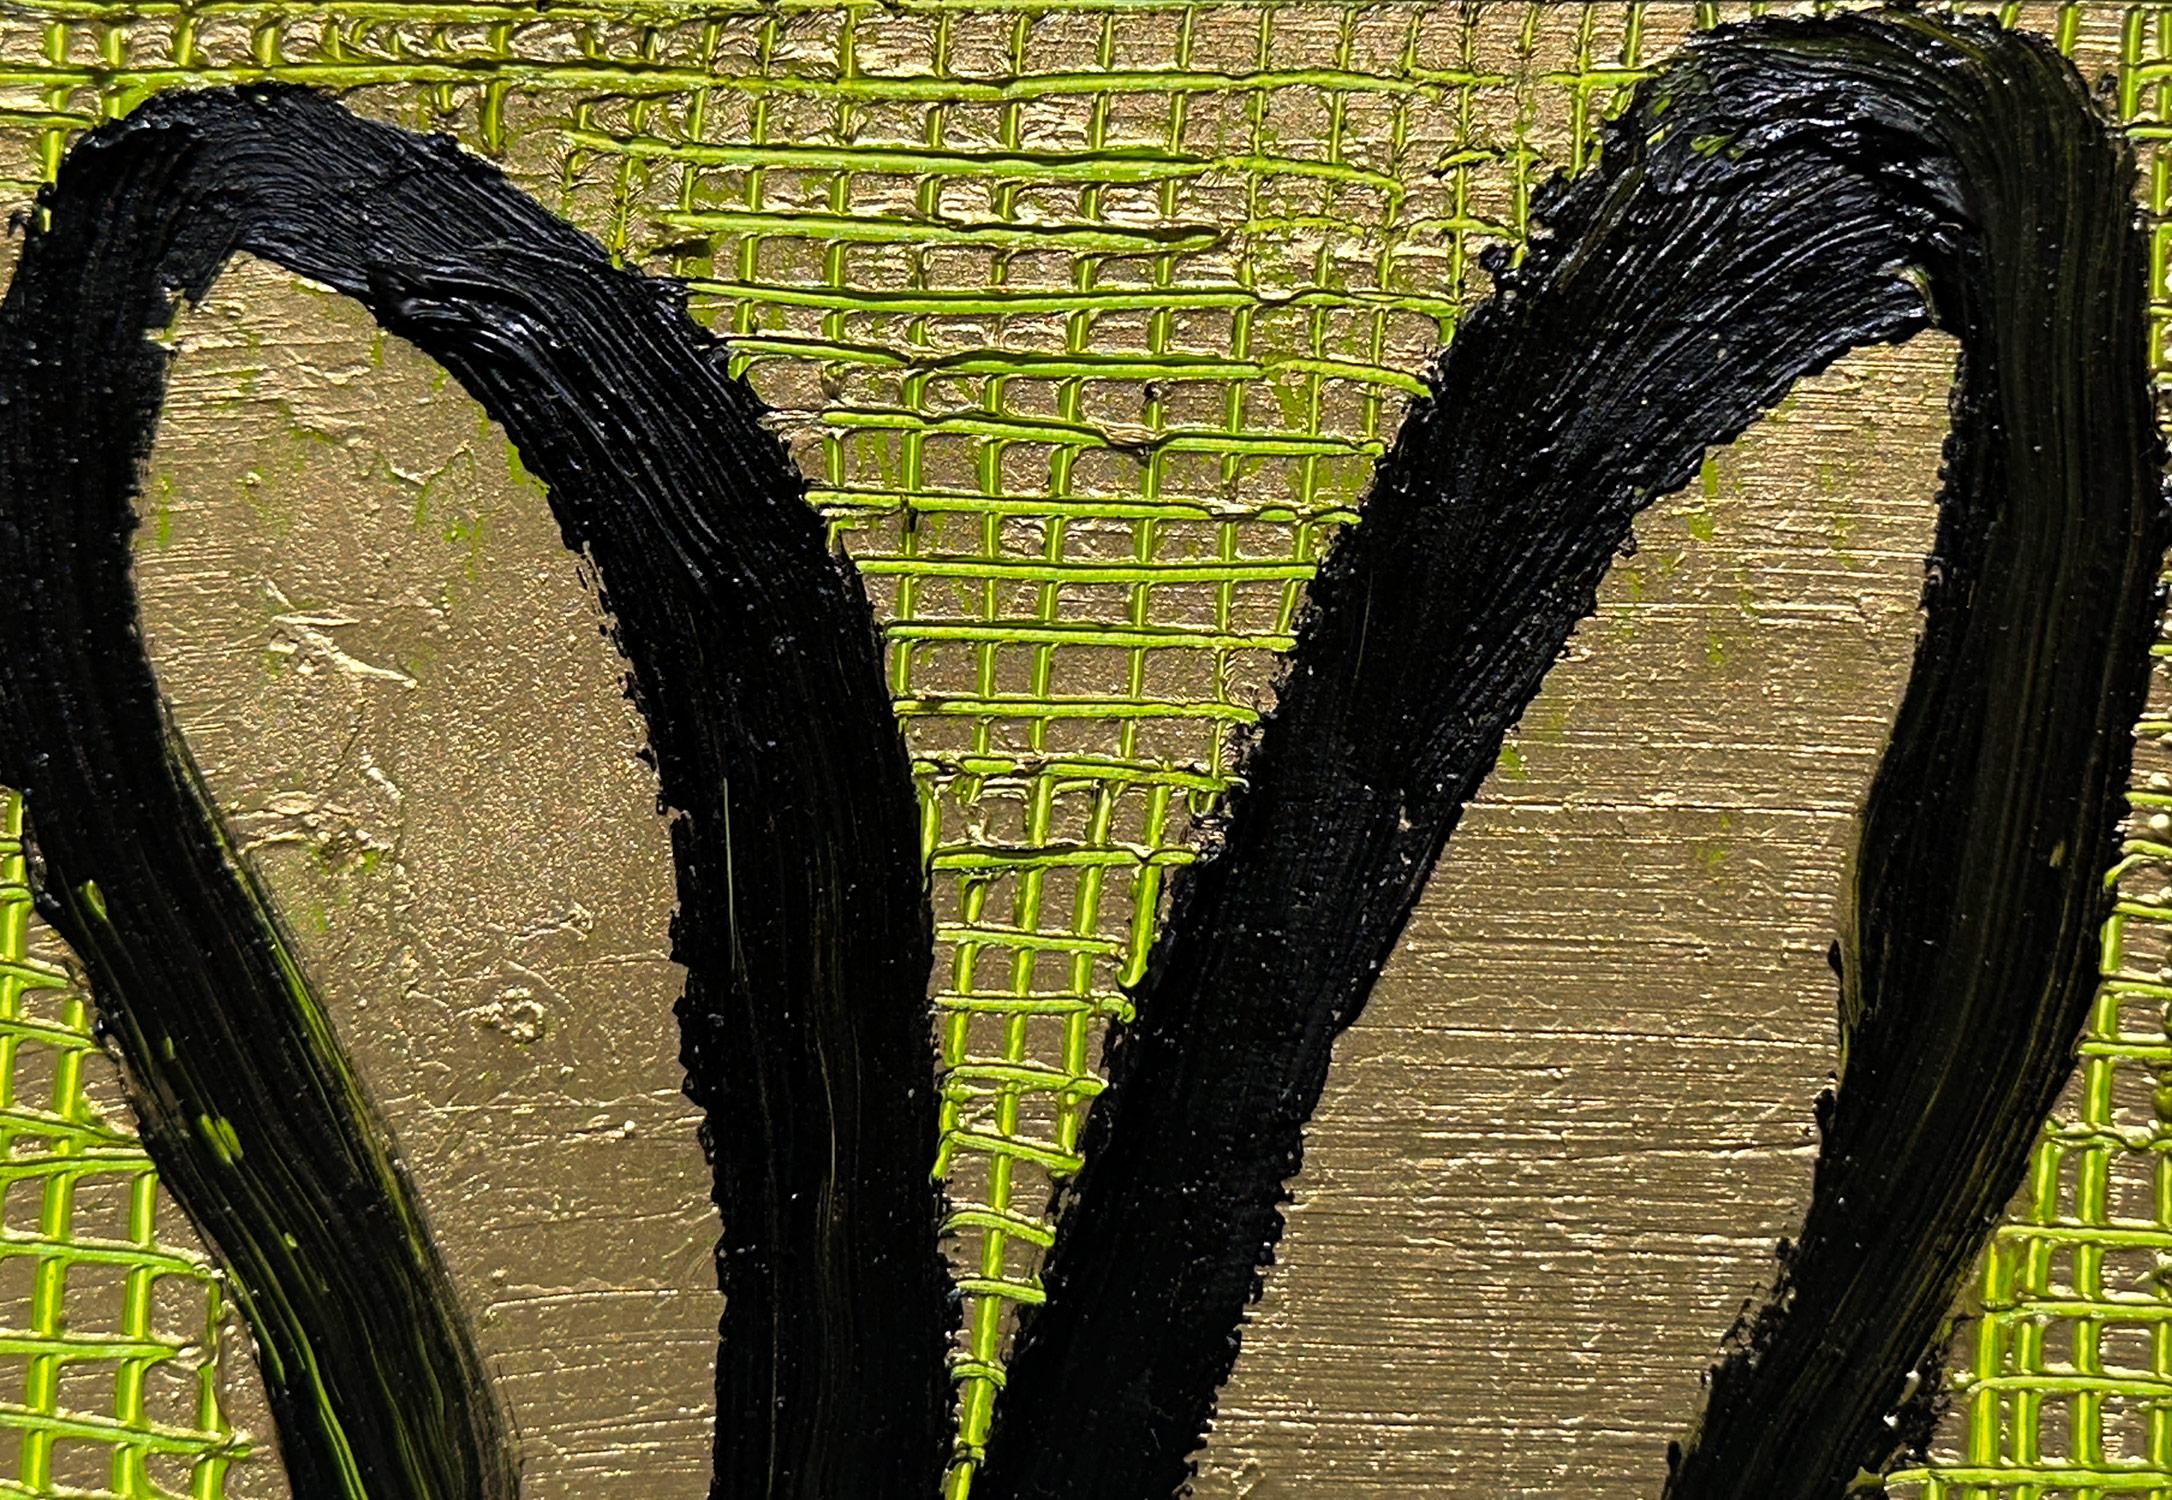 A wonderful composition of one of Slonem's most iconic subjects, Bunnies. This piece depicts a gestural figure of a black bunny with lime green accents and Gold background with thick use of colorful paint. It is housed in a wonderful gold tone